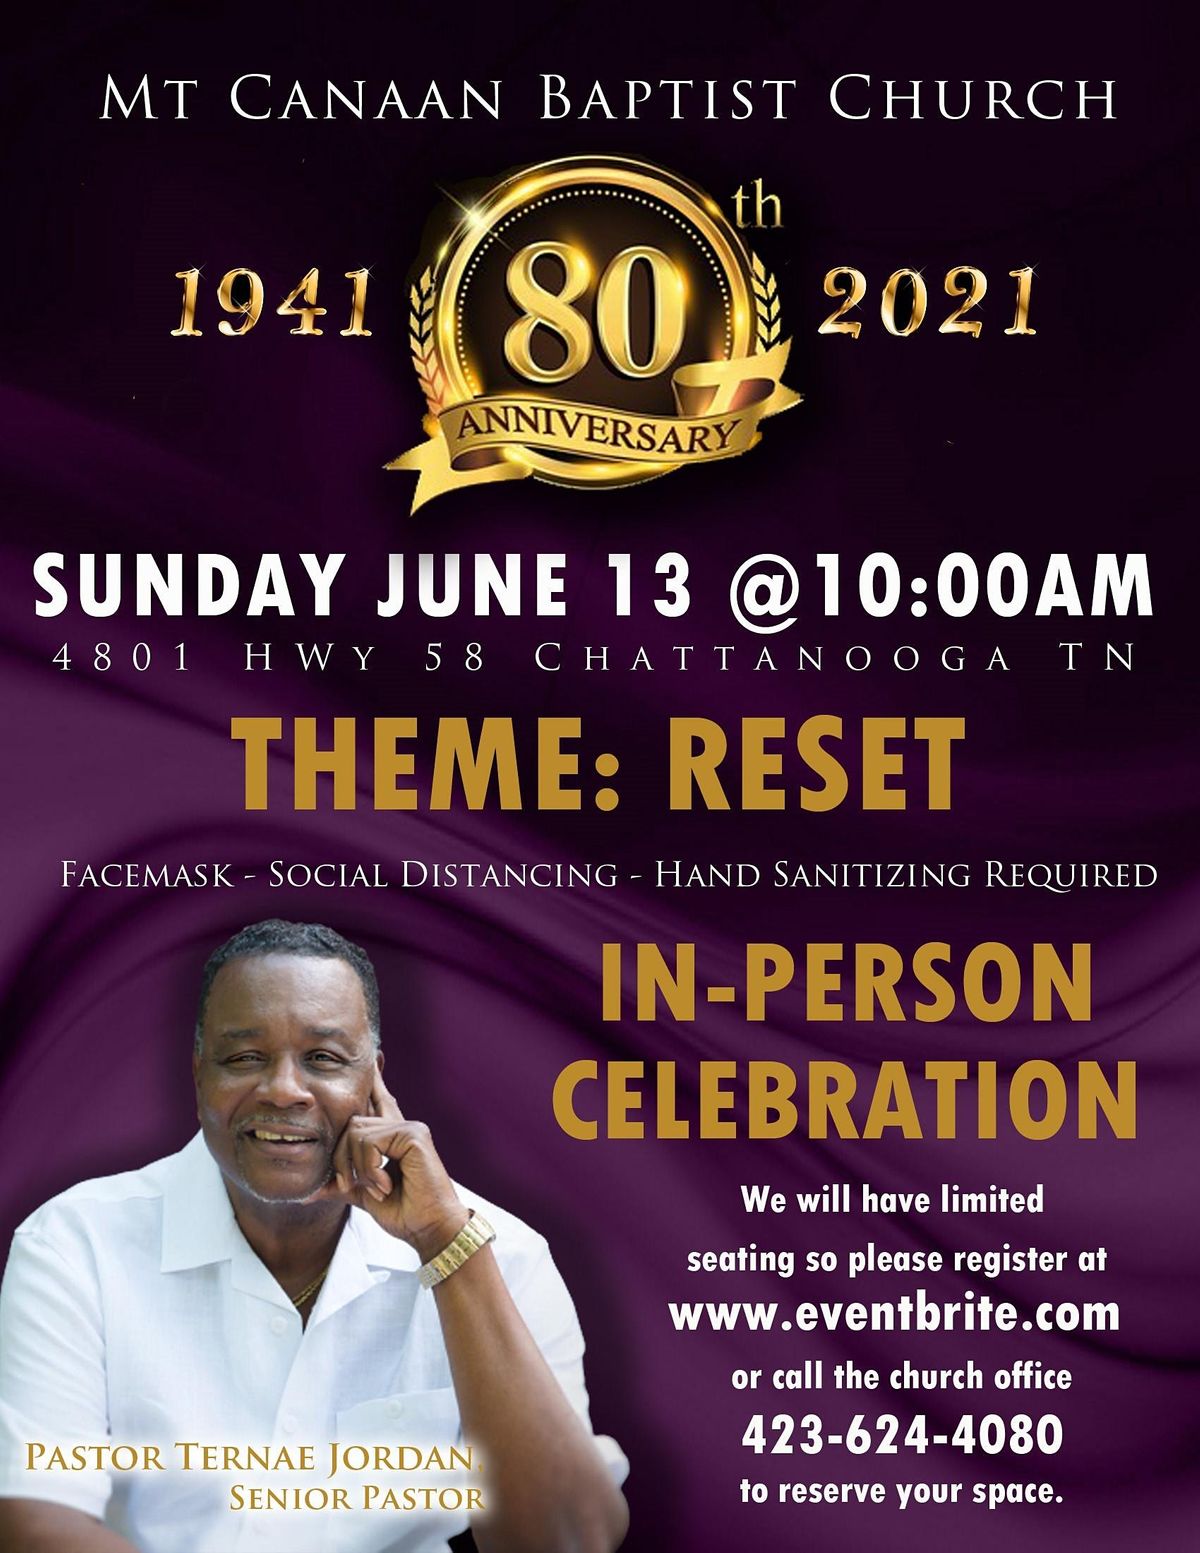 Mt. Canaan Baptist Church 80th Anniversary and Re-Opening